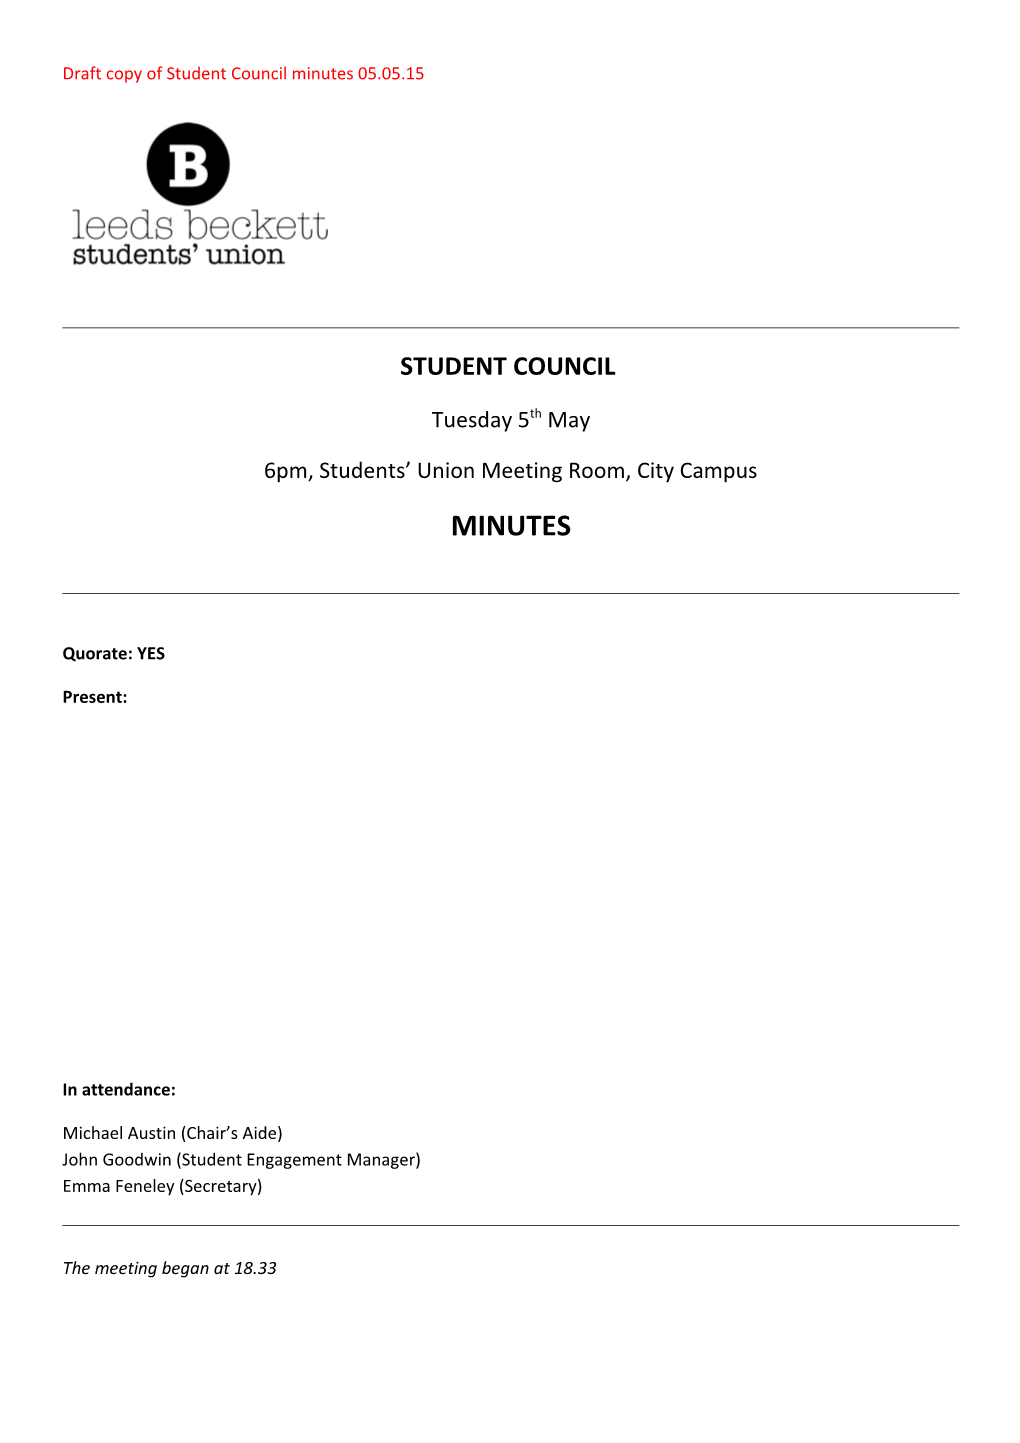 Draft Copy of Student Council Minutes 05.05.15